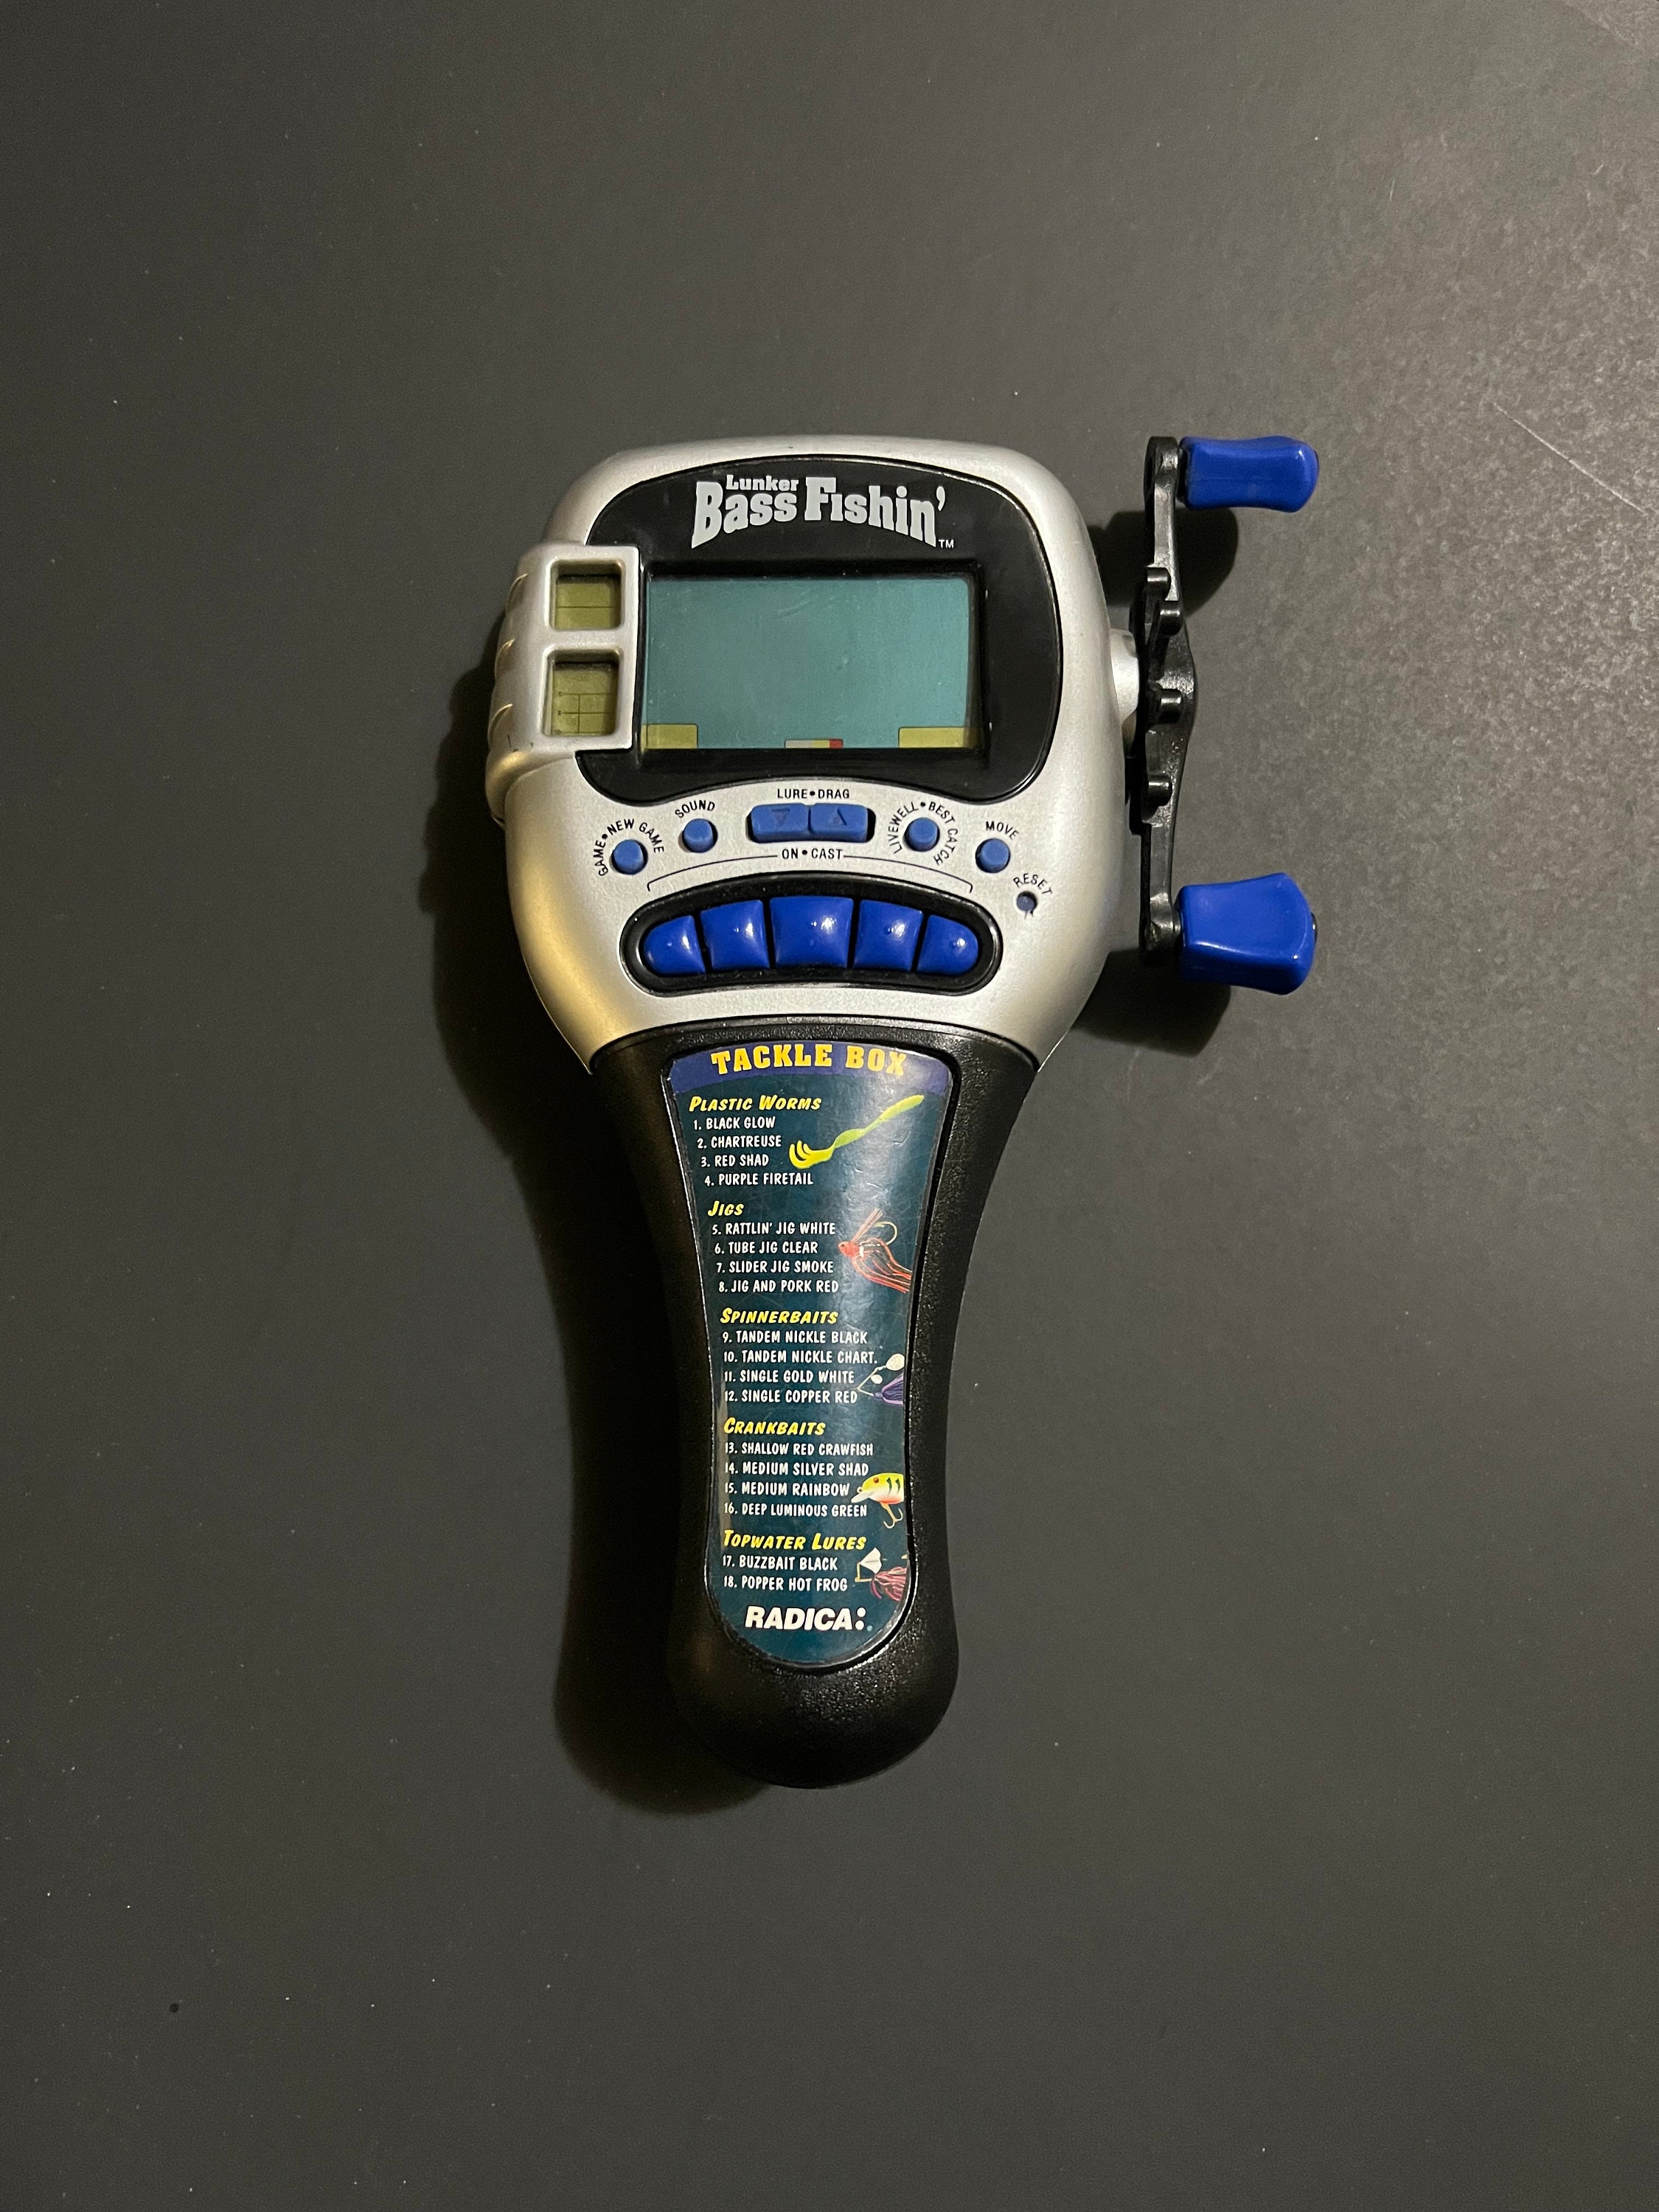 Electronic Handheld Lunker Bass Fishin' Game Radica Fishing 1997 90's  1990's Hand-held Vintage Toy Fish Sports -  New Zealand